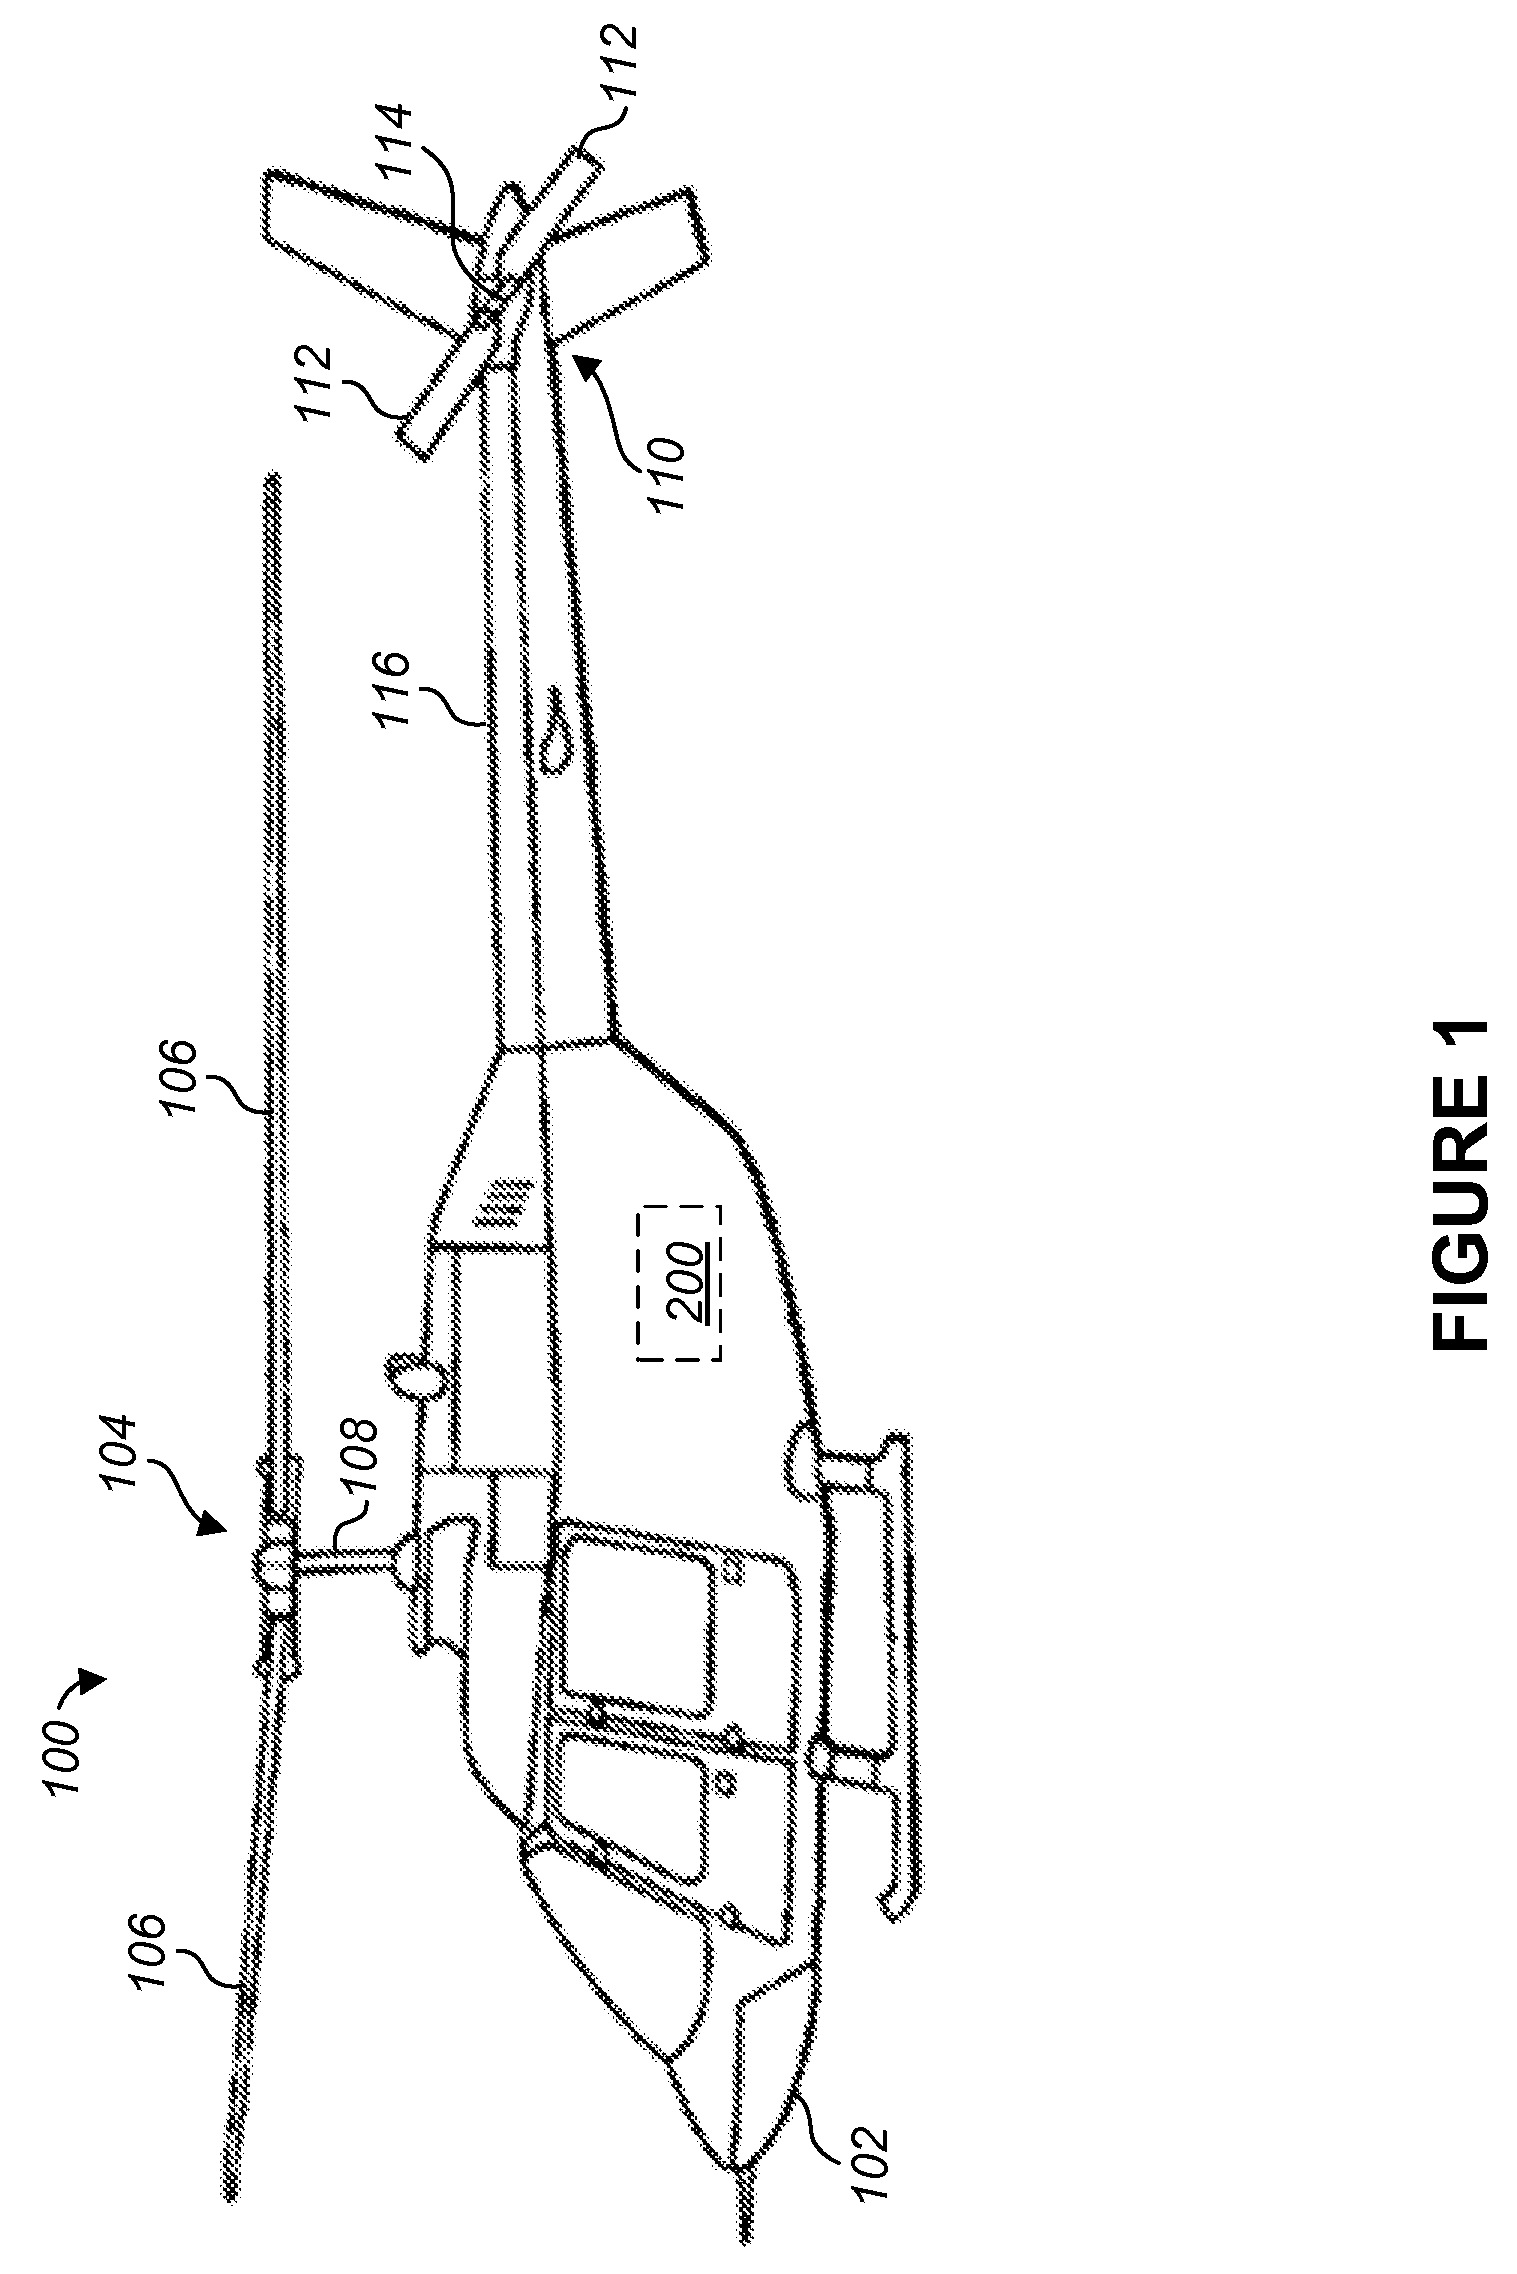 Collision avoidance and warning system